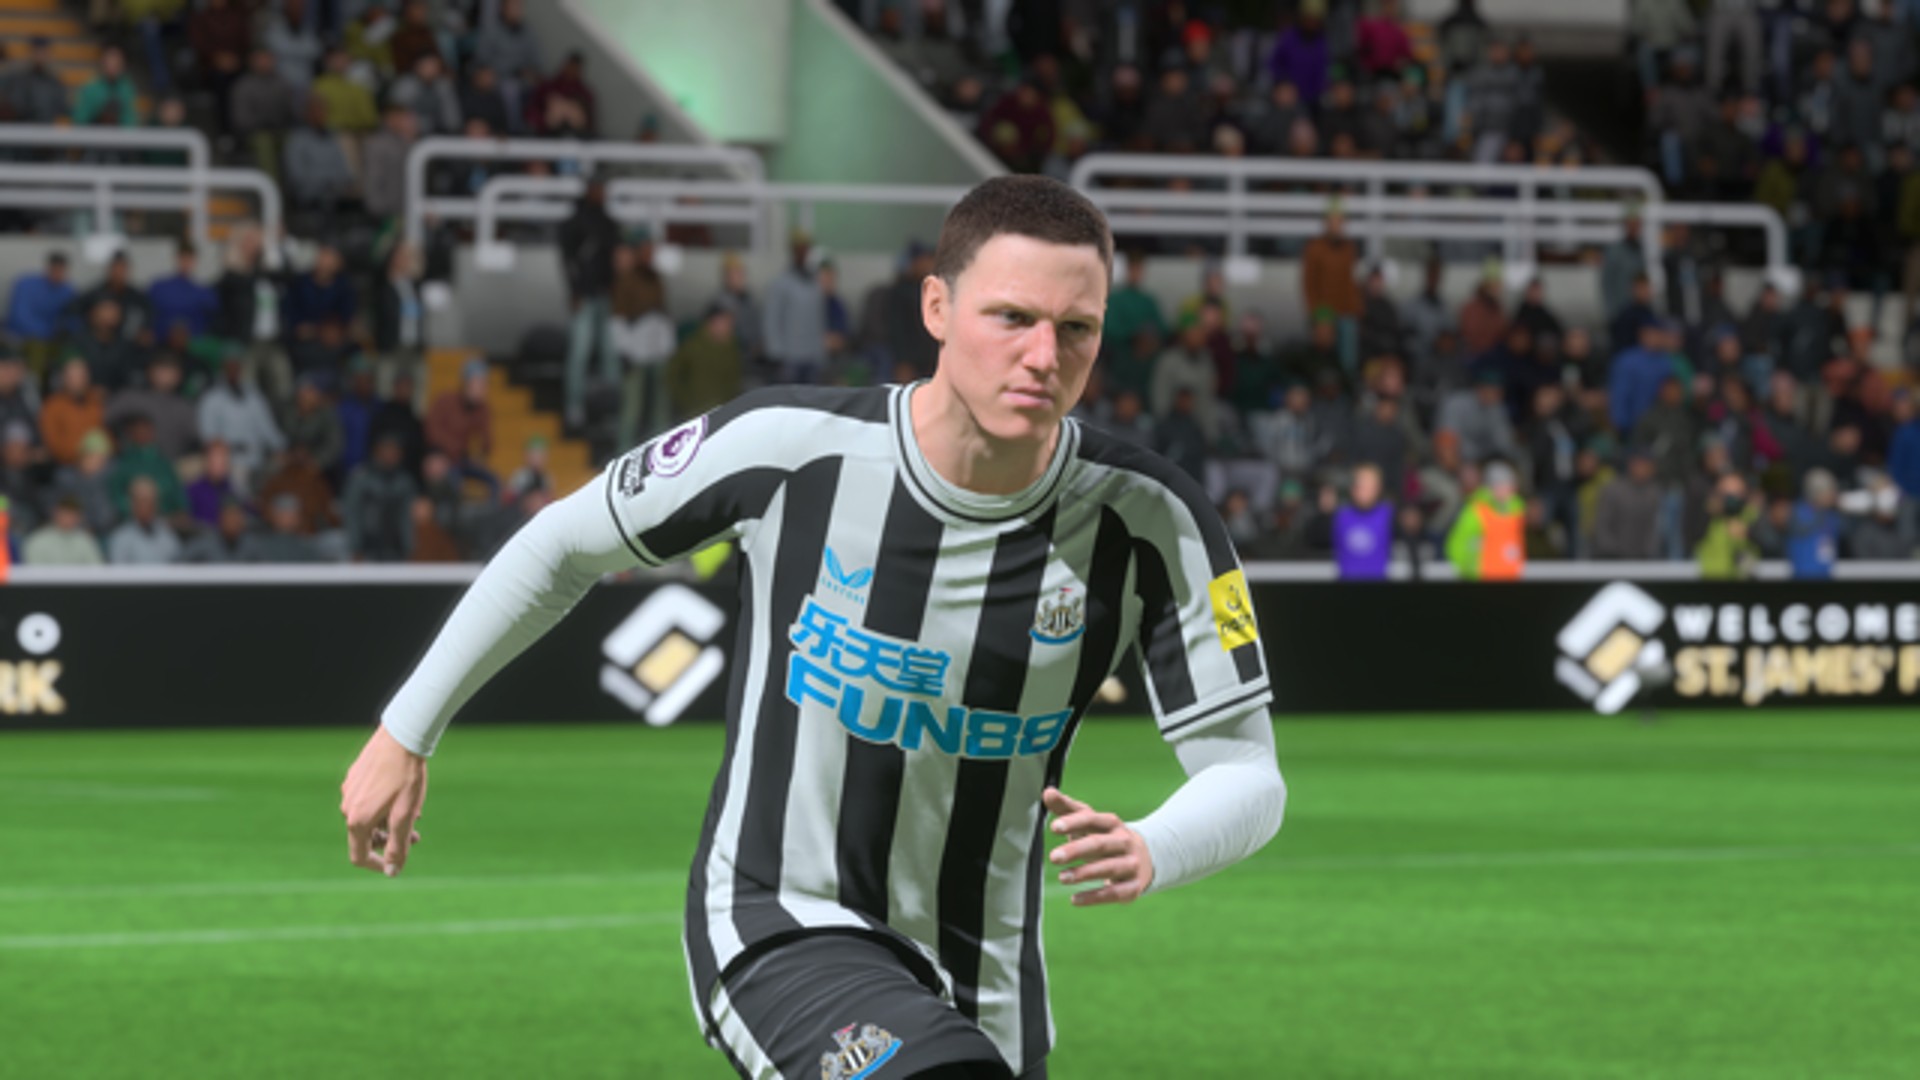 FIFA 23 Career Mode: The clubs with the biggest budgets